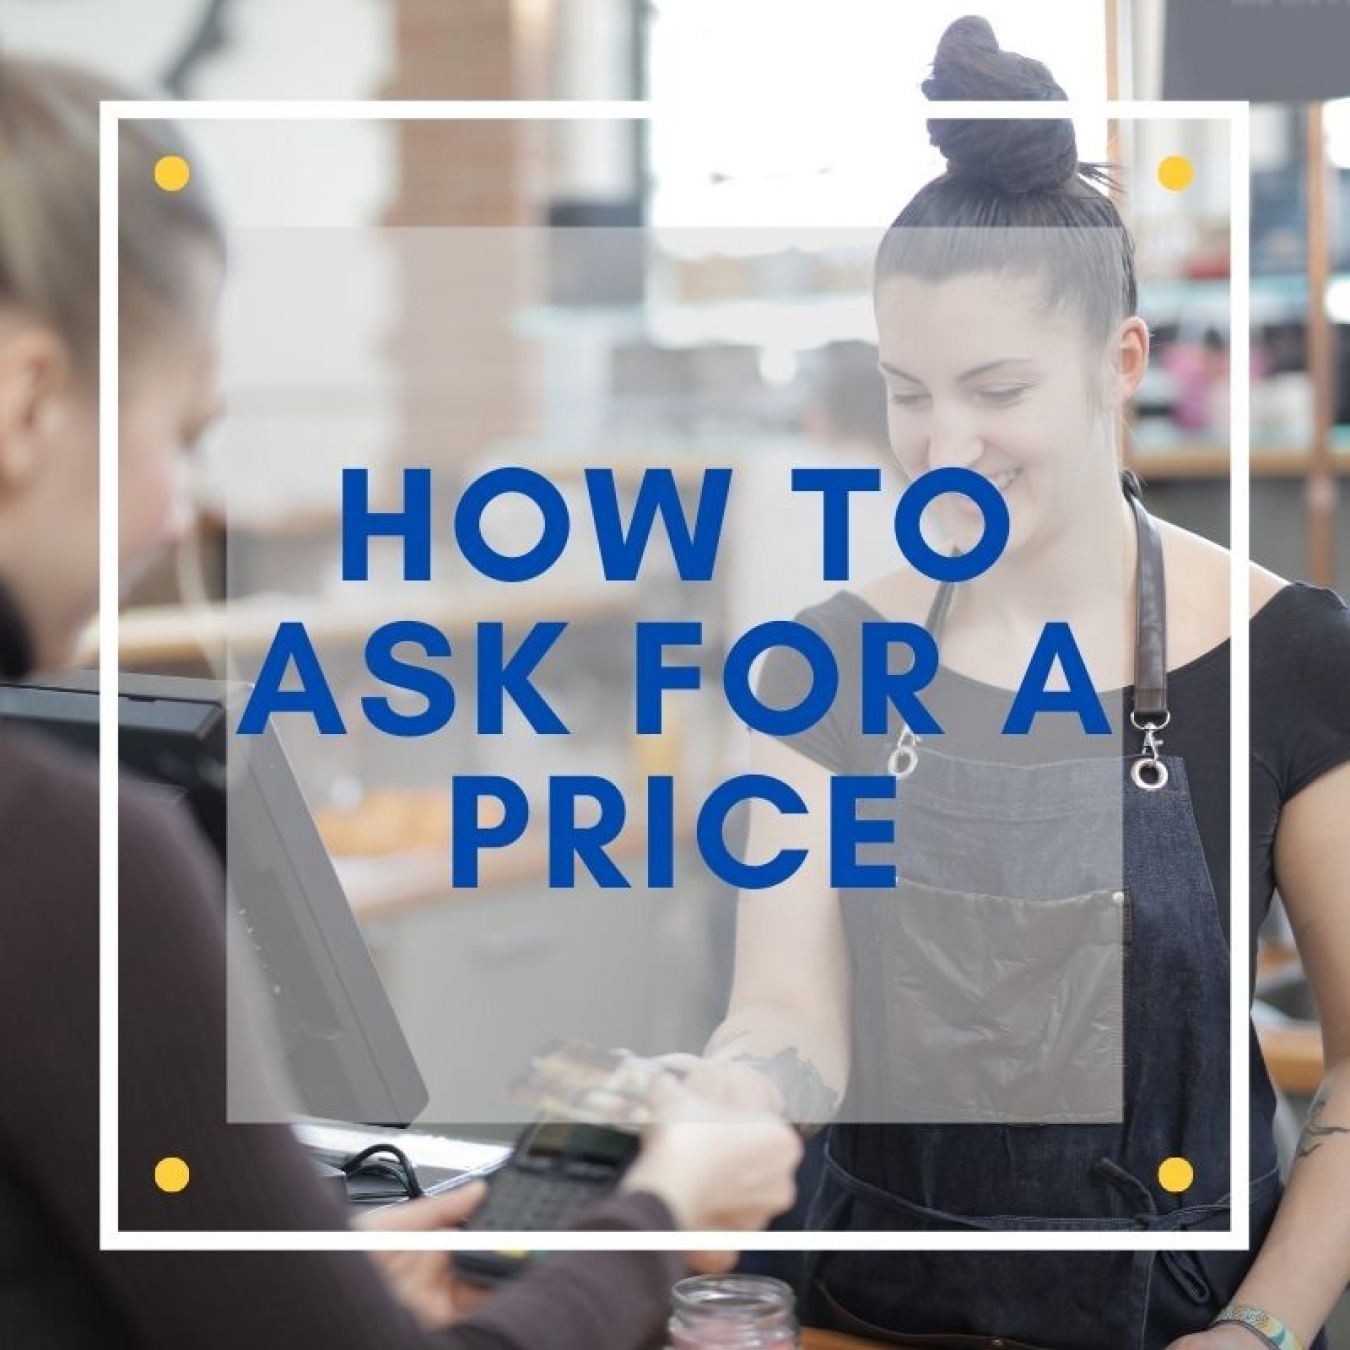 How to ask for a price in Greek